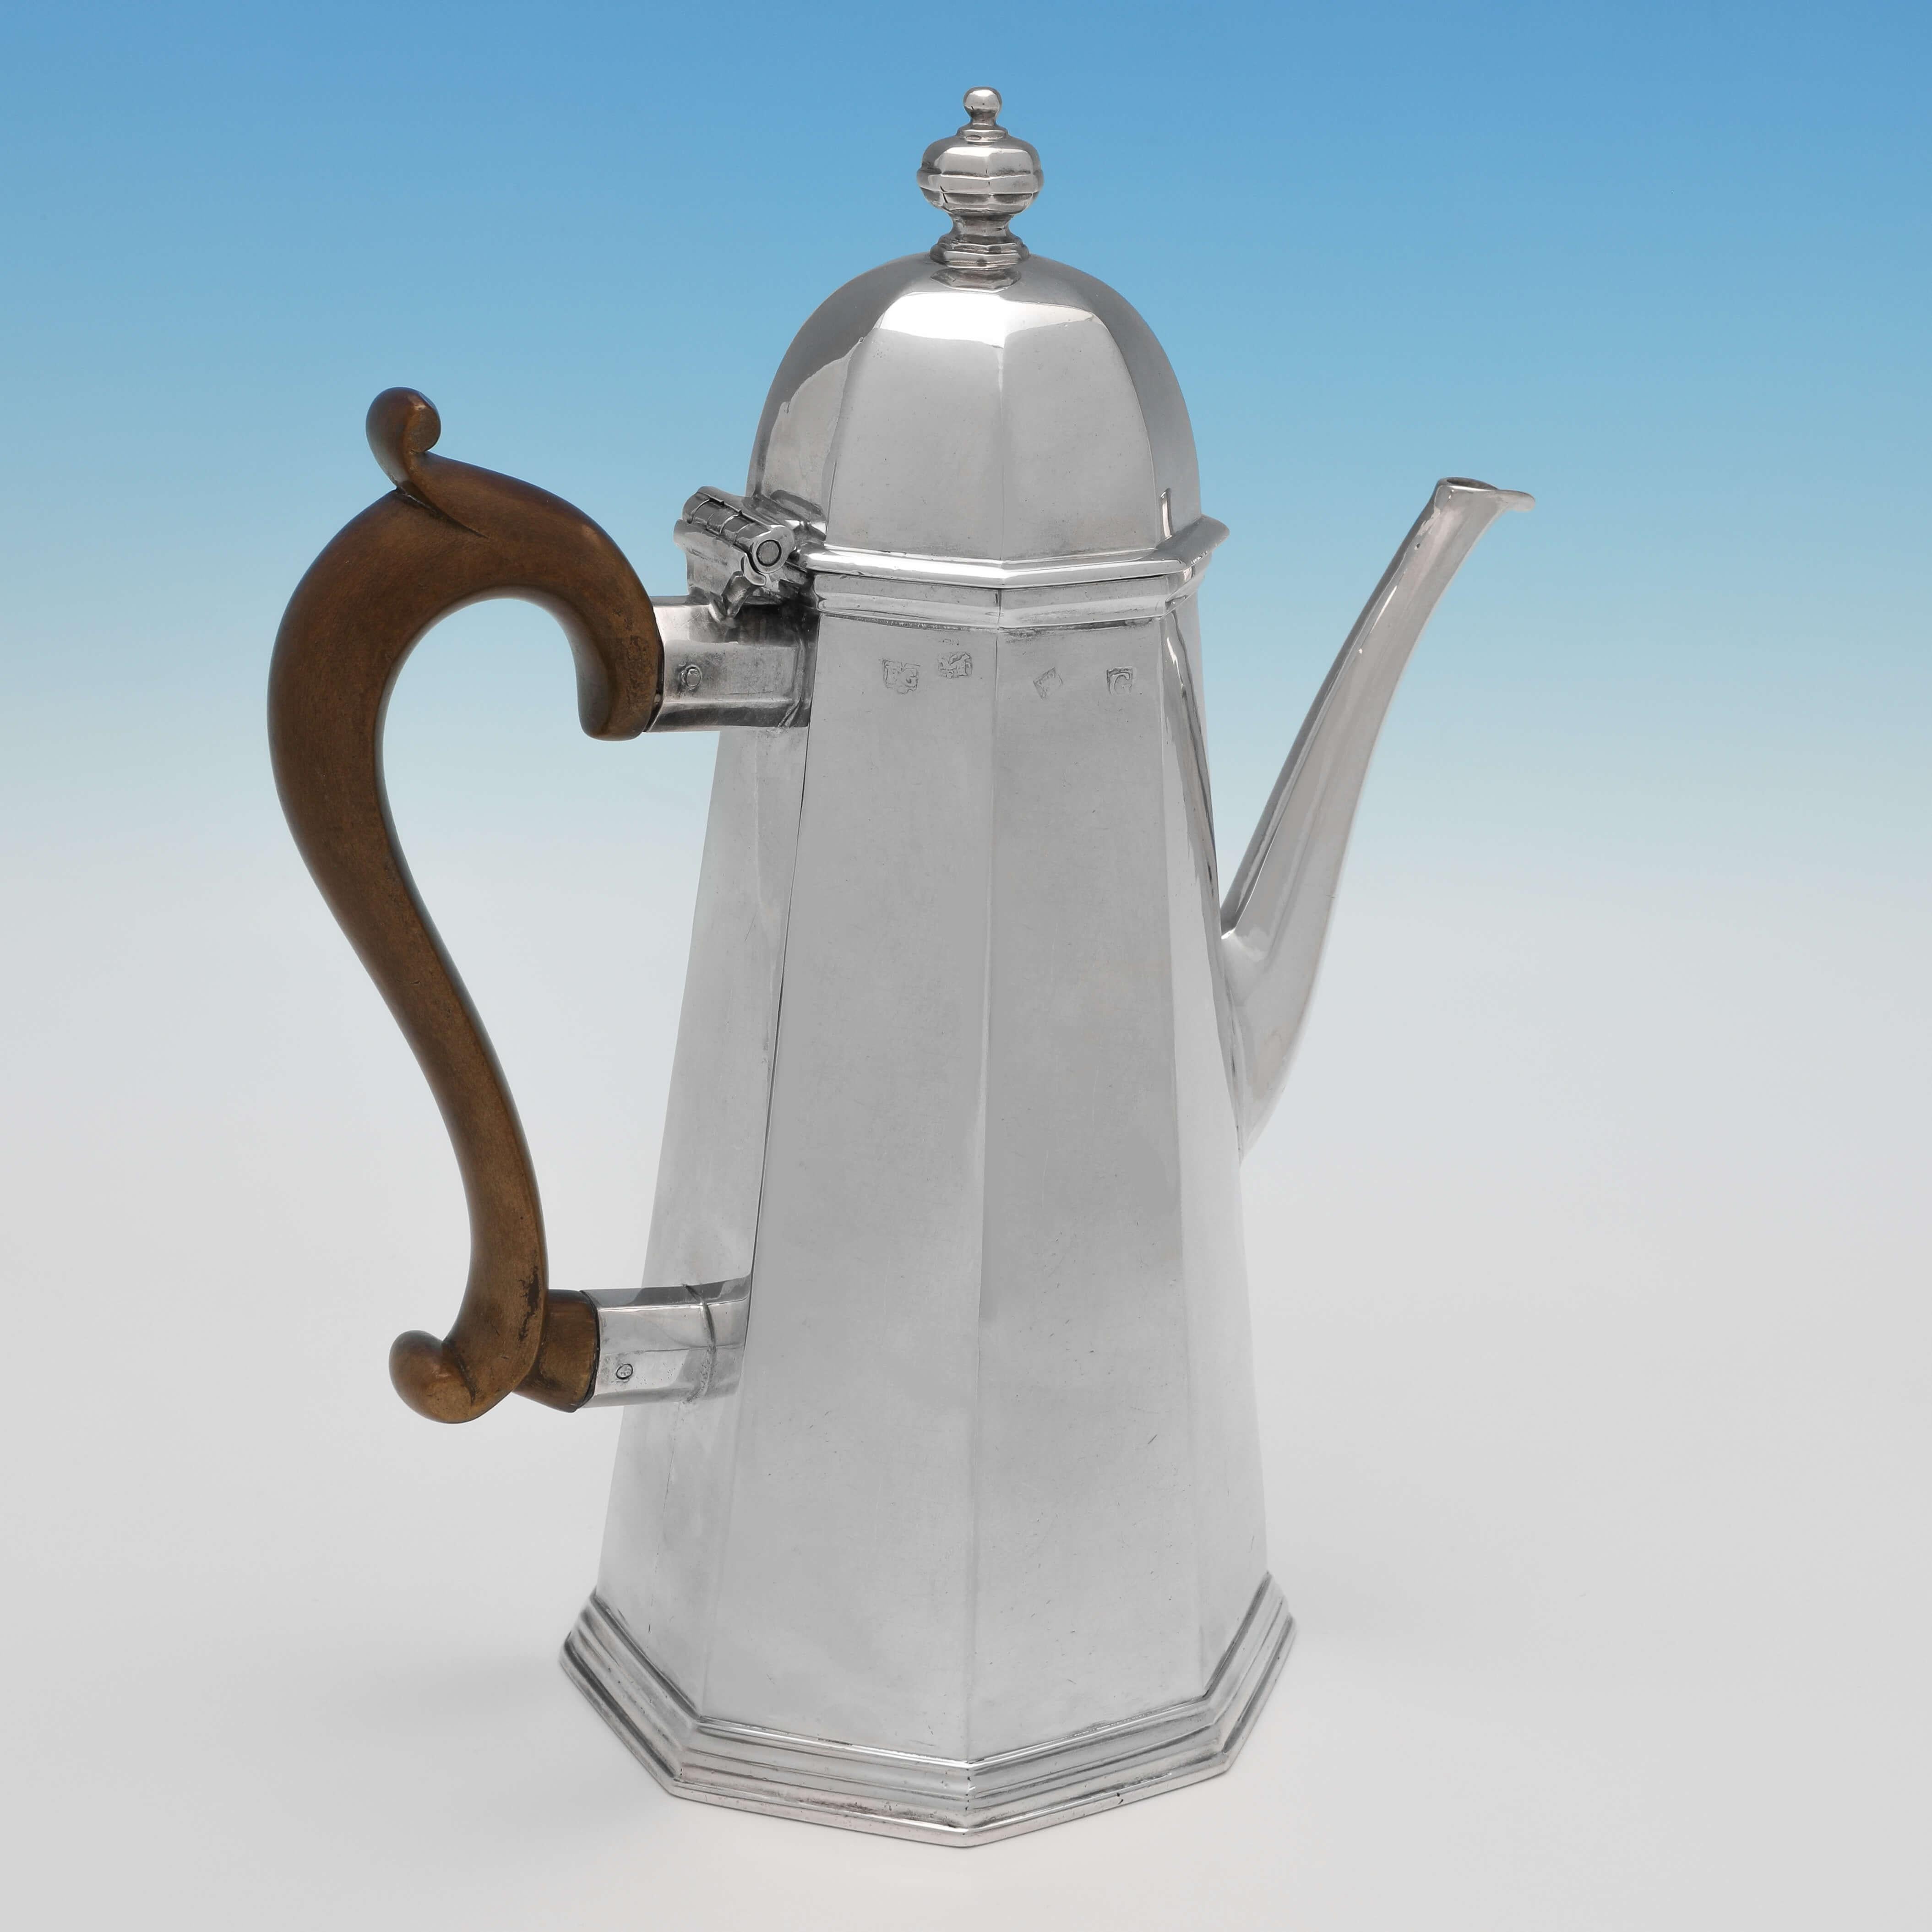 Hallmarked in London in 1722 by Francis Garthorne, this stunning, George I, Antique Sterling Silver Coffee Pot has a rare octagonal shape, with a fruitwood handle and features a full armorial engraving to one side. The coffee pot measures